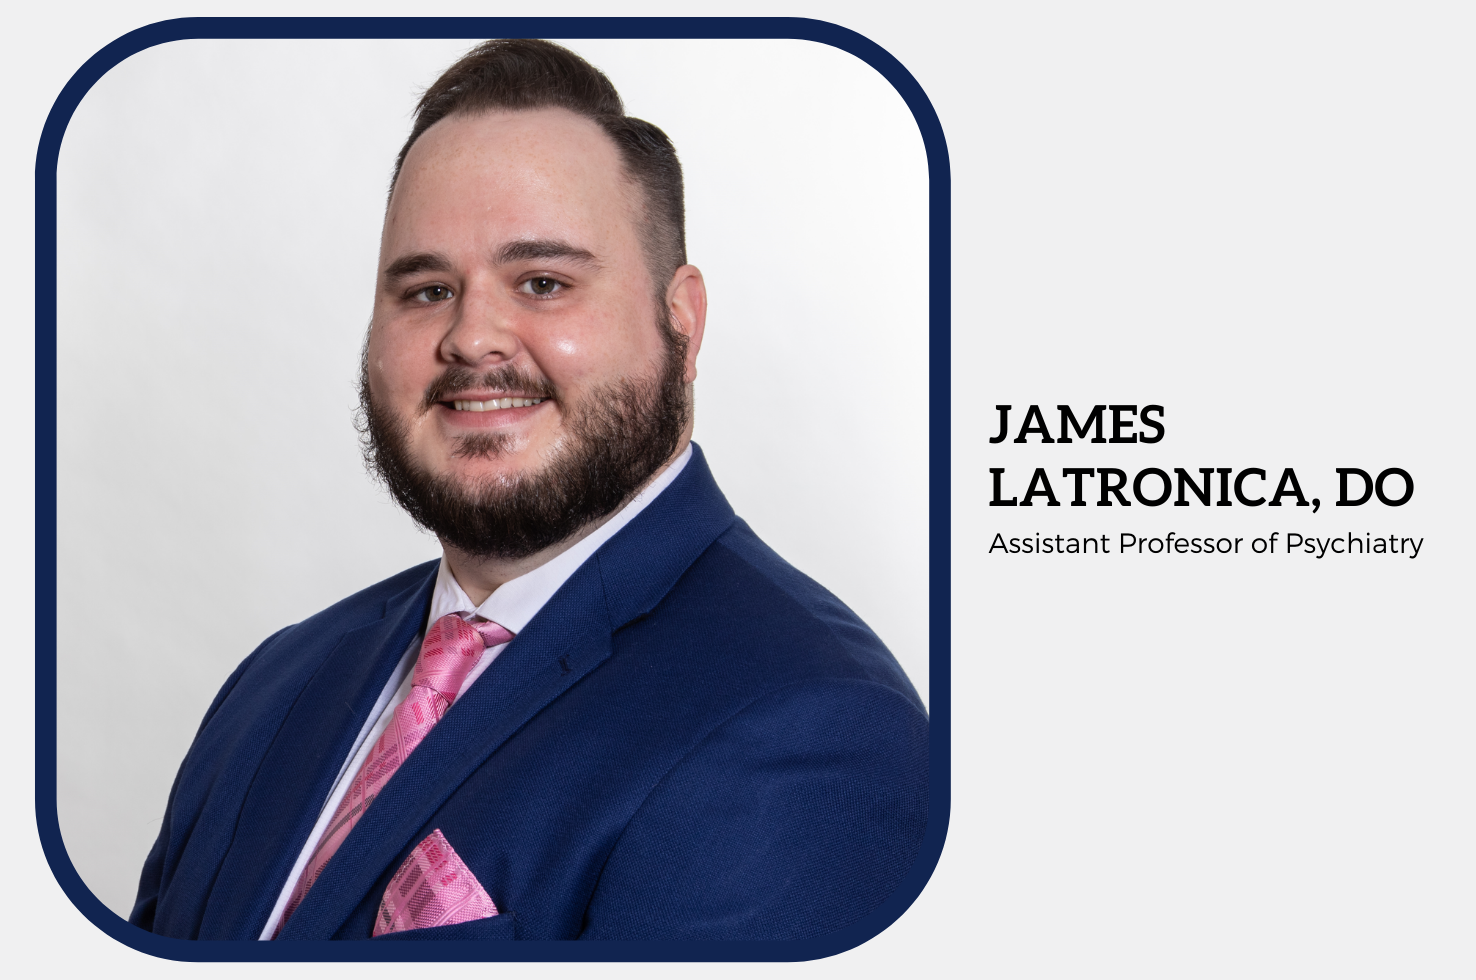 James Latronica, DO, Named to PAMED’s 2022 Top Physicians Under 40 List